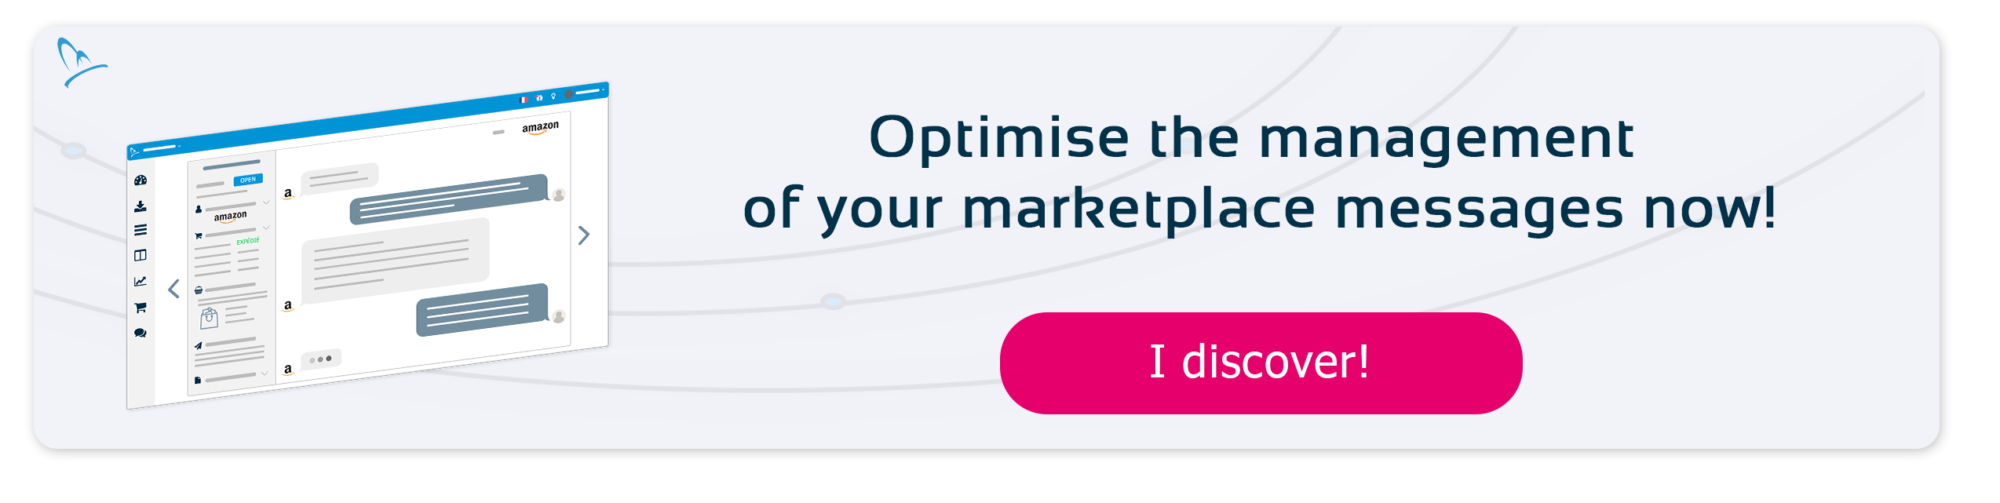 Optimise the management of your marketplace messages now!